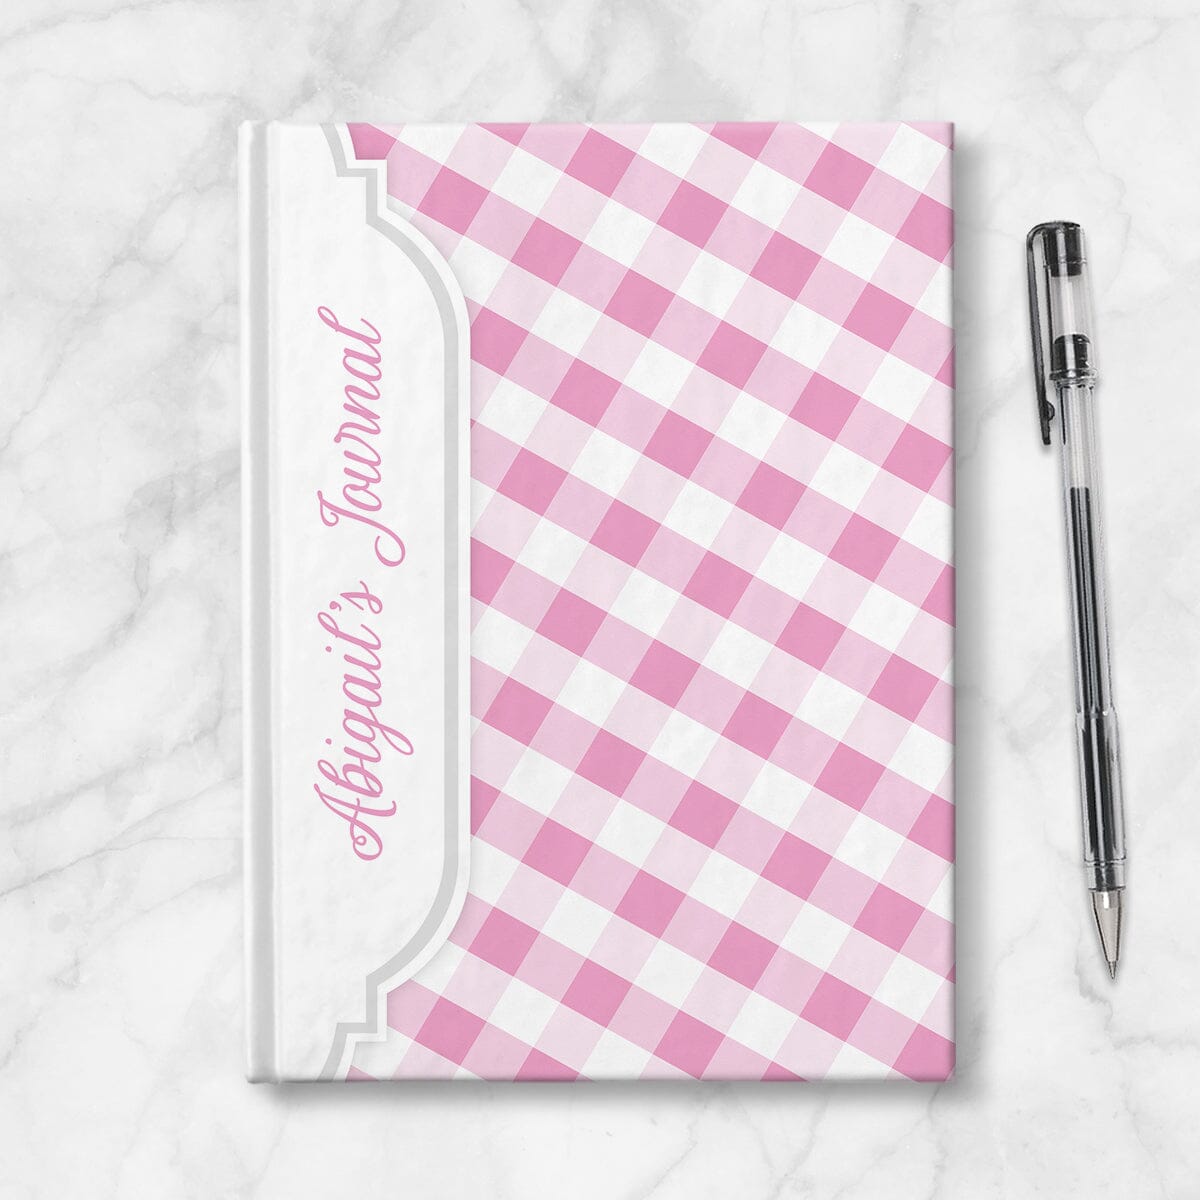 Personalized Pink Gingham Journal at Artistically Invited. Image shows the book on a countertop next to a pen.